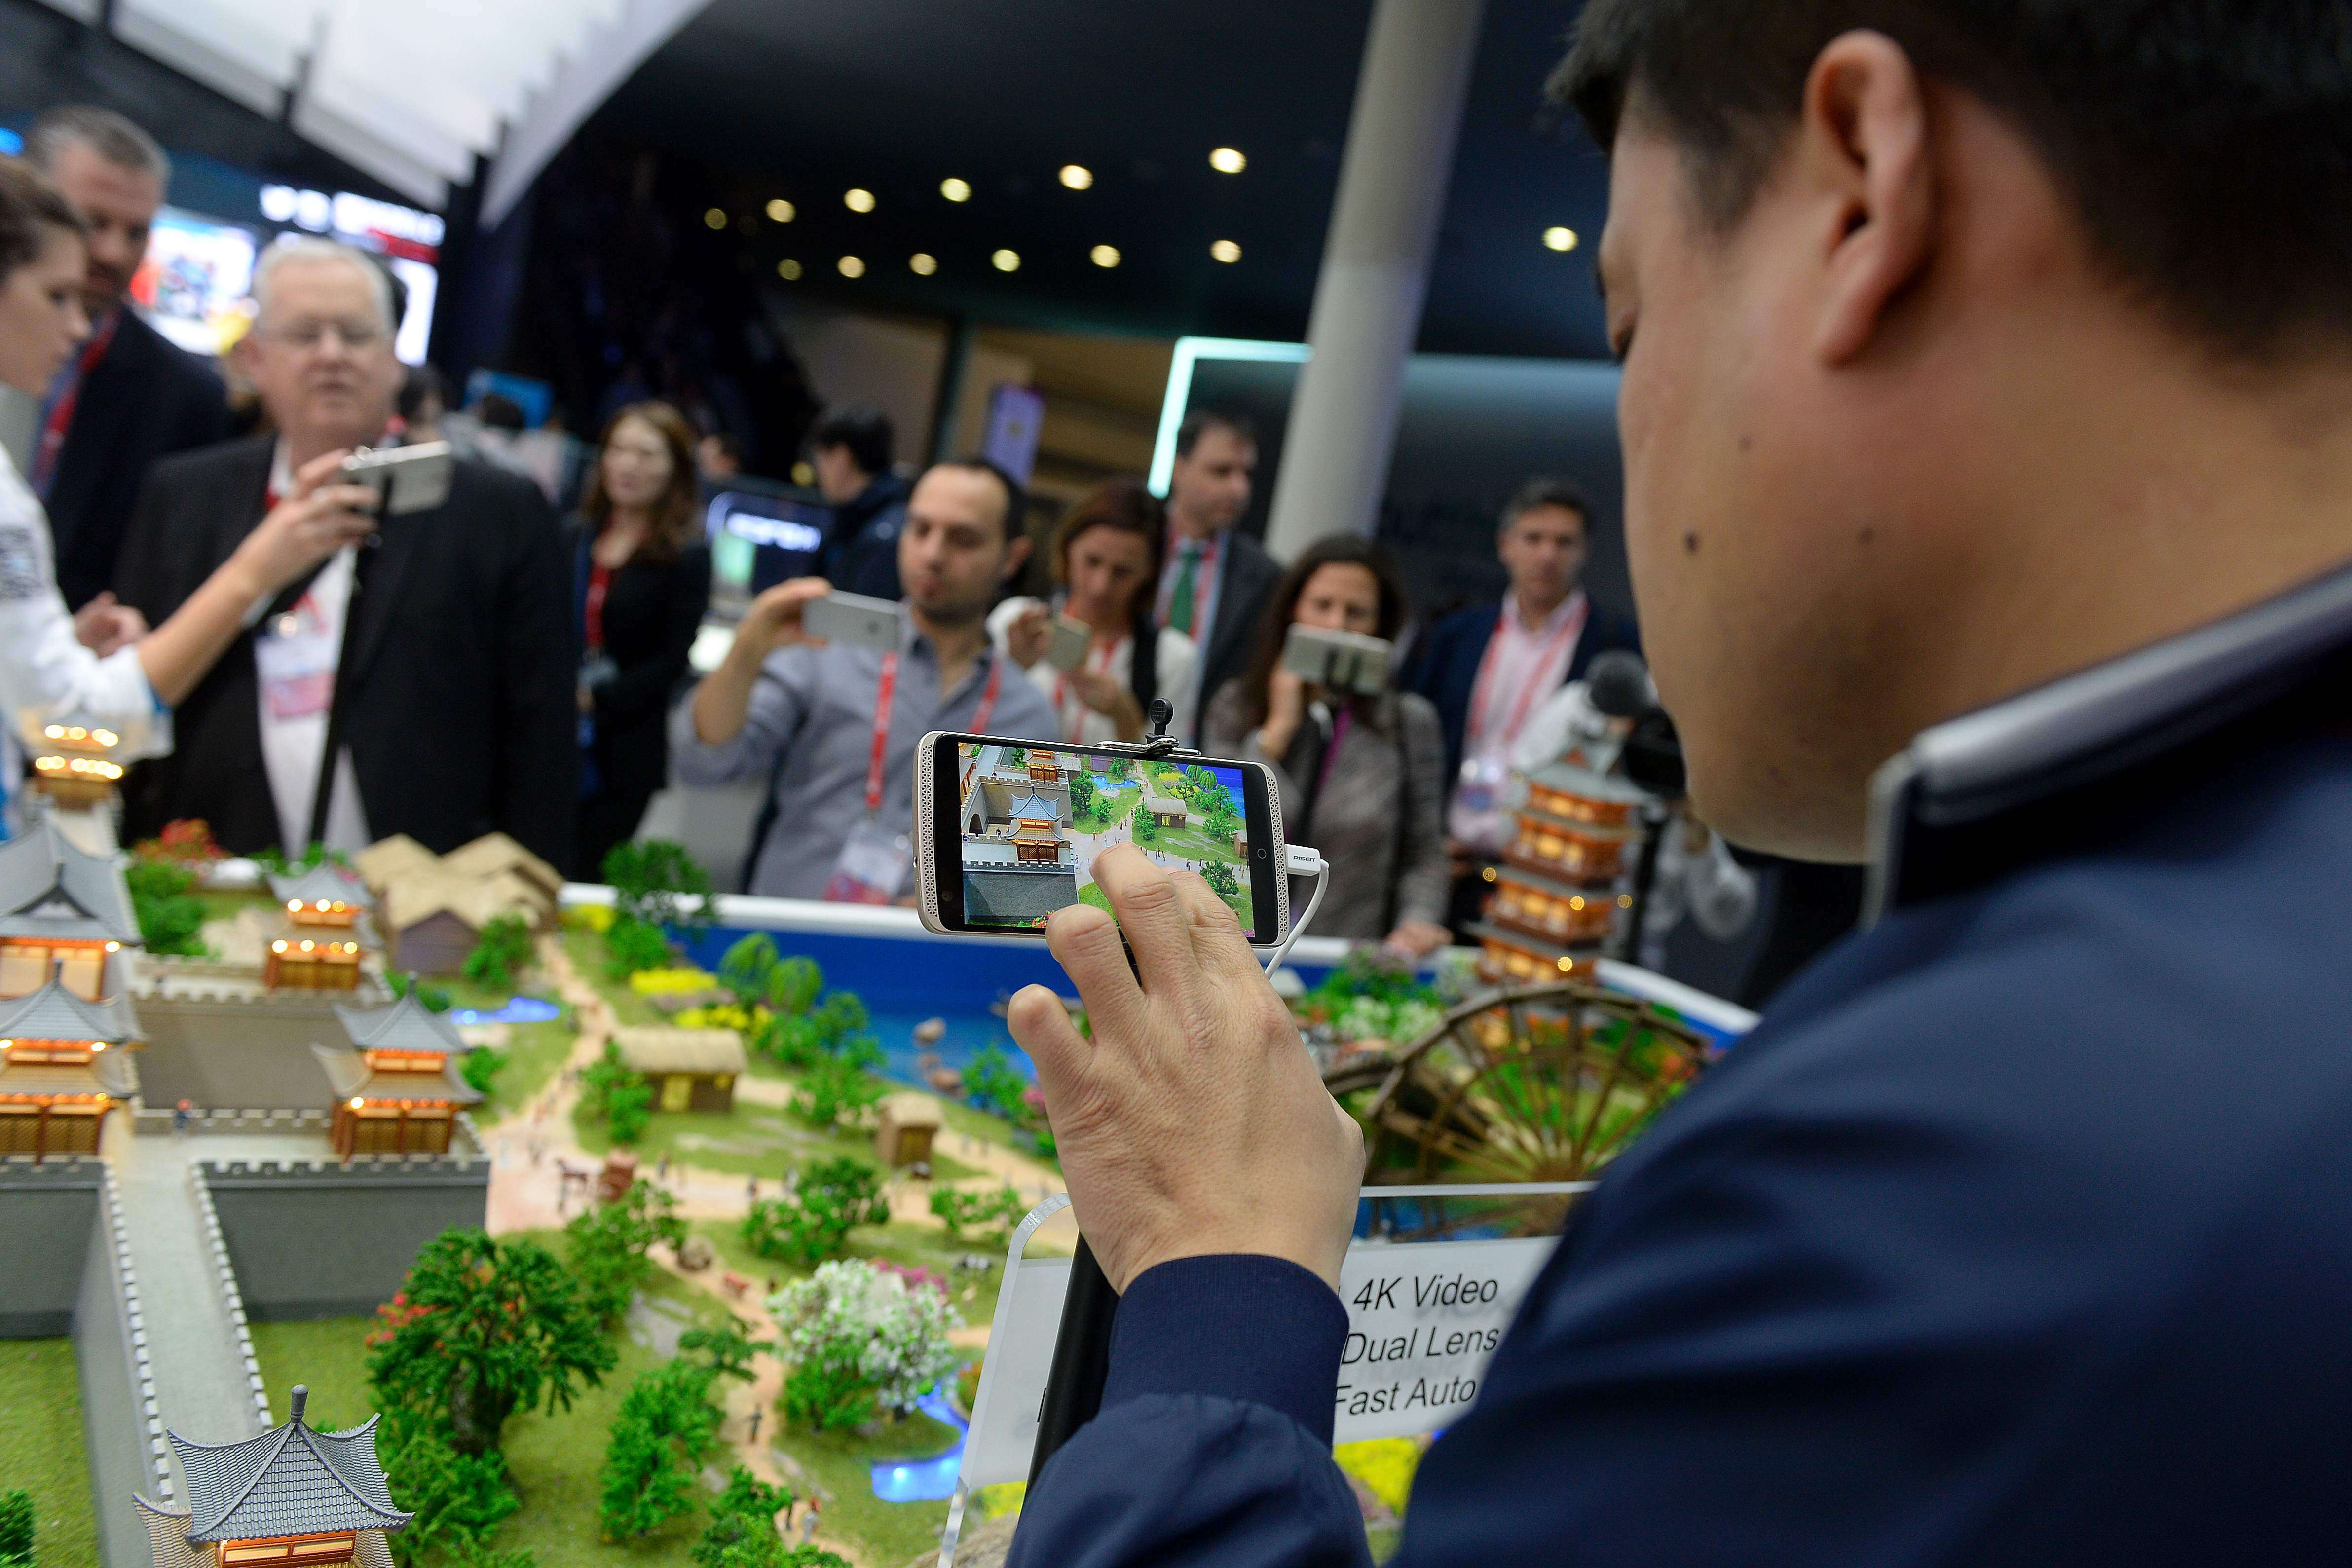 Visitors test models of the ZTE smartphones with 4K video at the Mobile World Congress in Barcelona. Photo: AFP